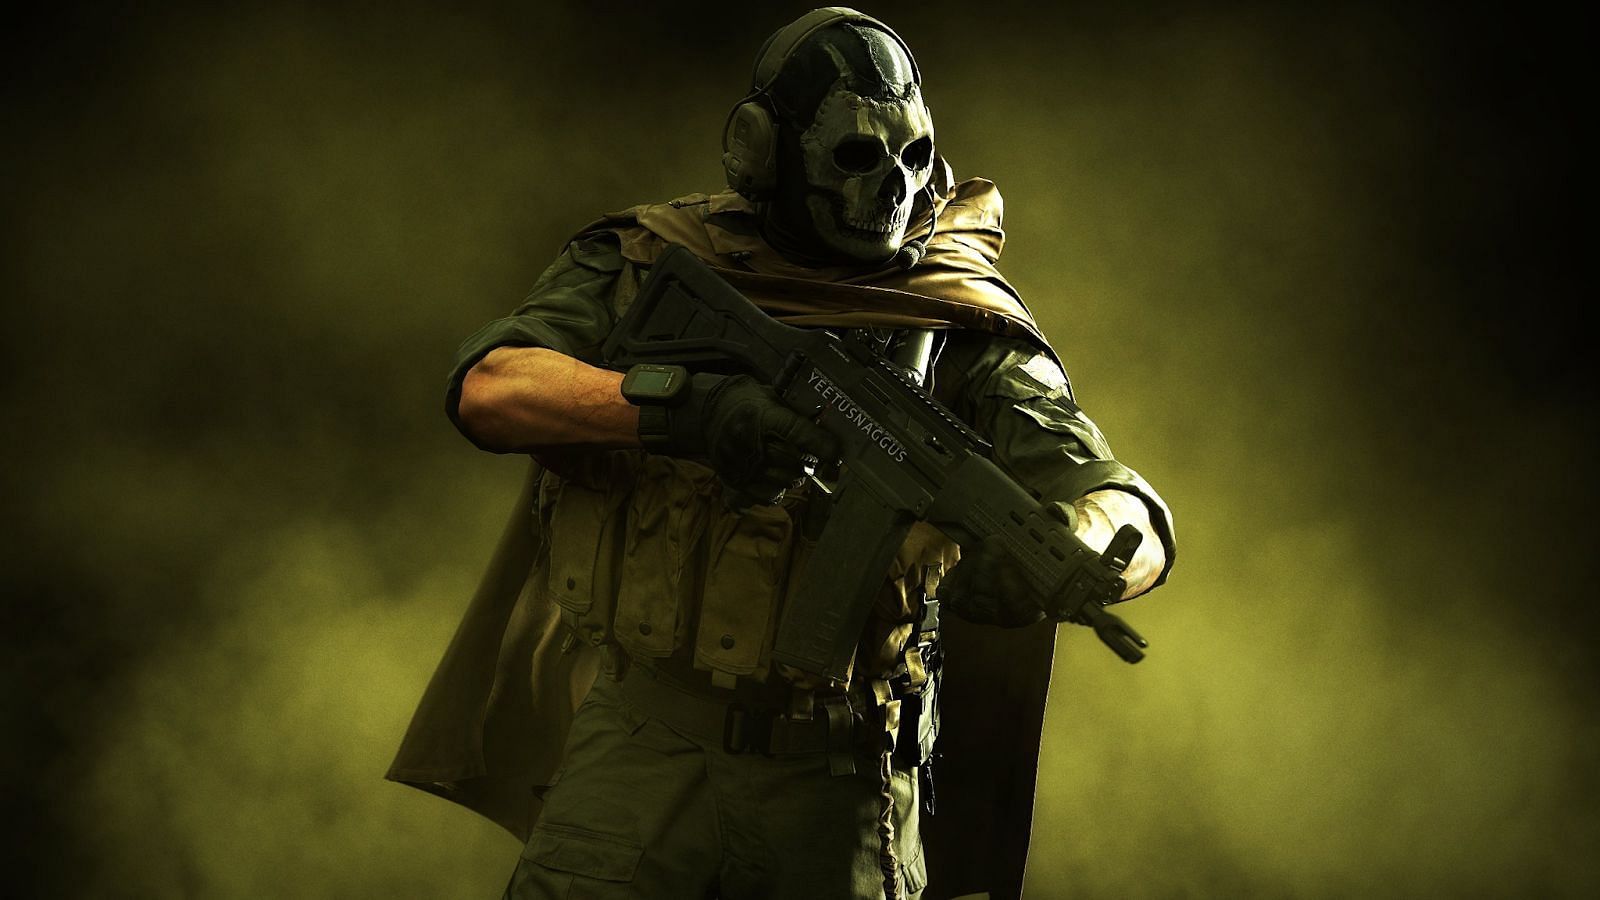 How old is Ghost character in CoD?